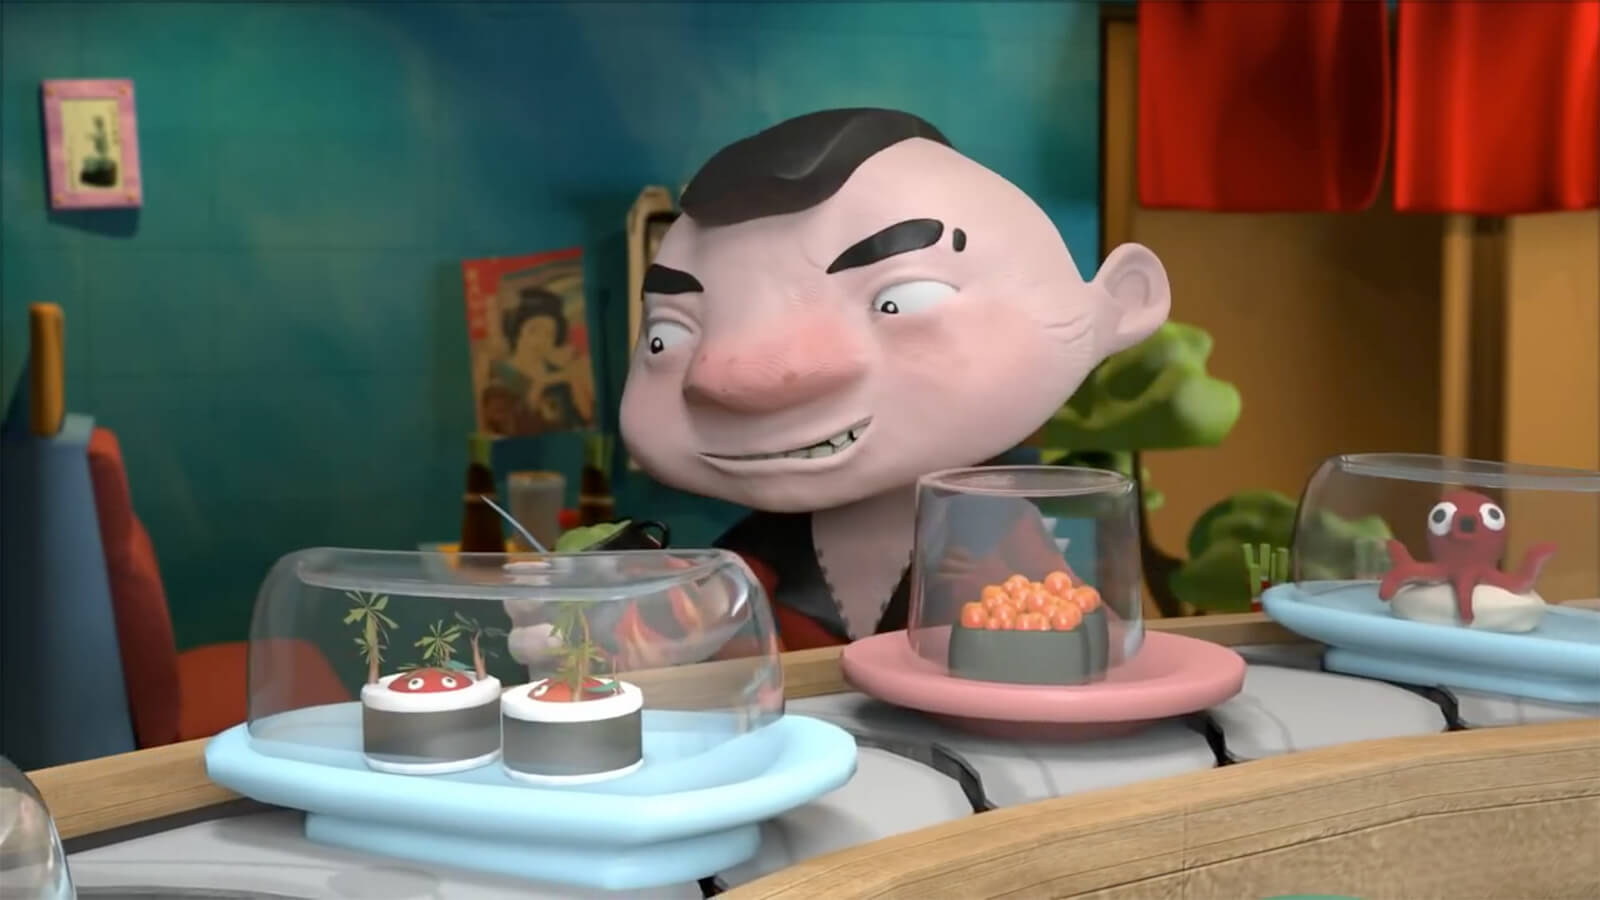 A short man with a mohawk haircut sits behind a sushi conveyor belt with playes of inventive creations under glass.